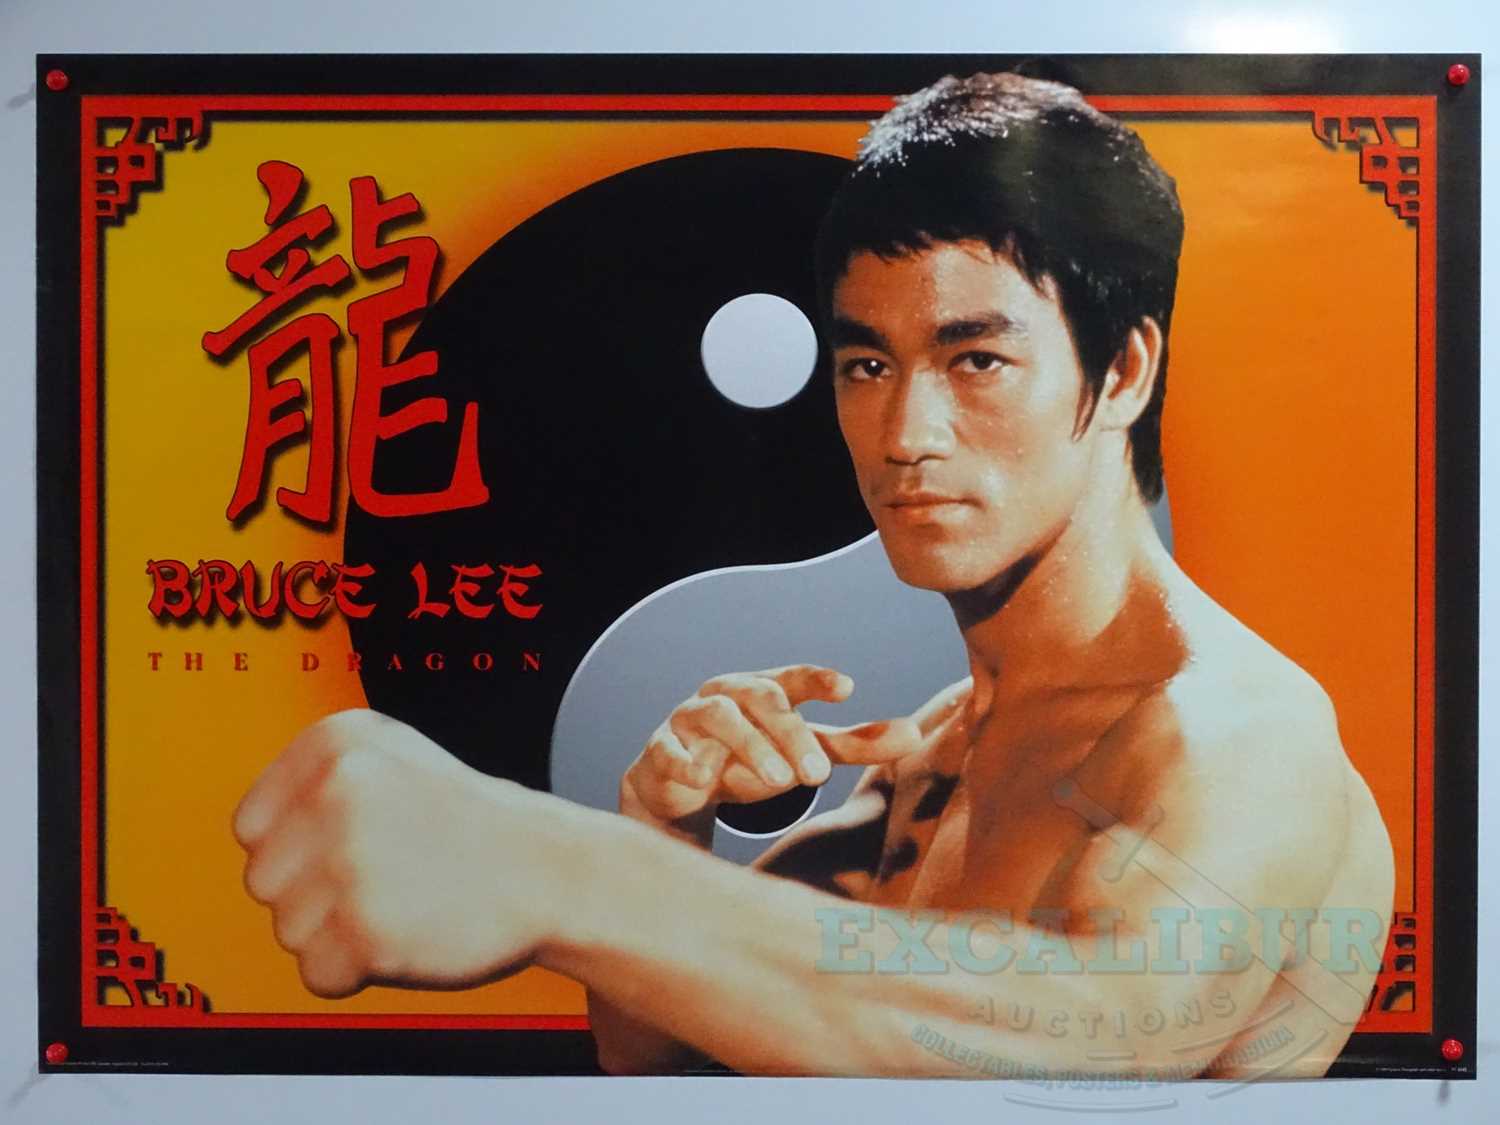 DRAGON : THE BRUCE LEE STORY (1993) - A commercial poster featuring BRUCE LEE - rolled (1 in lot)